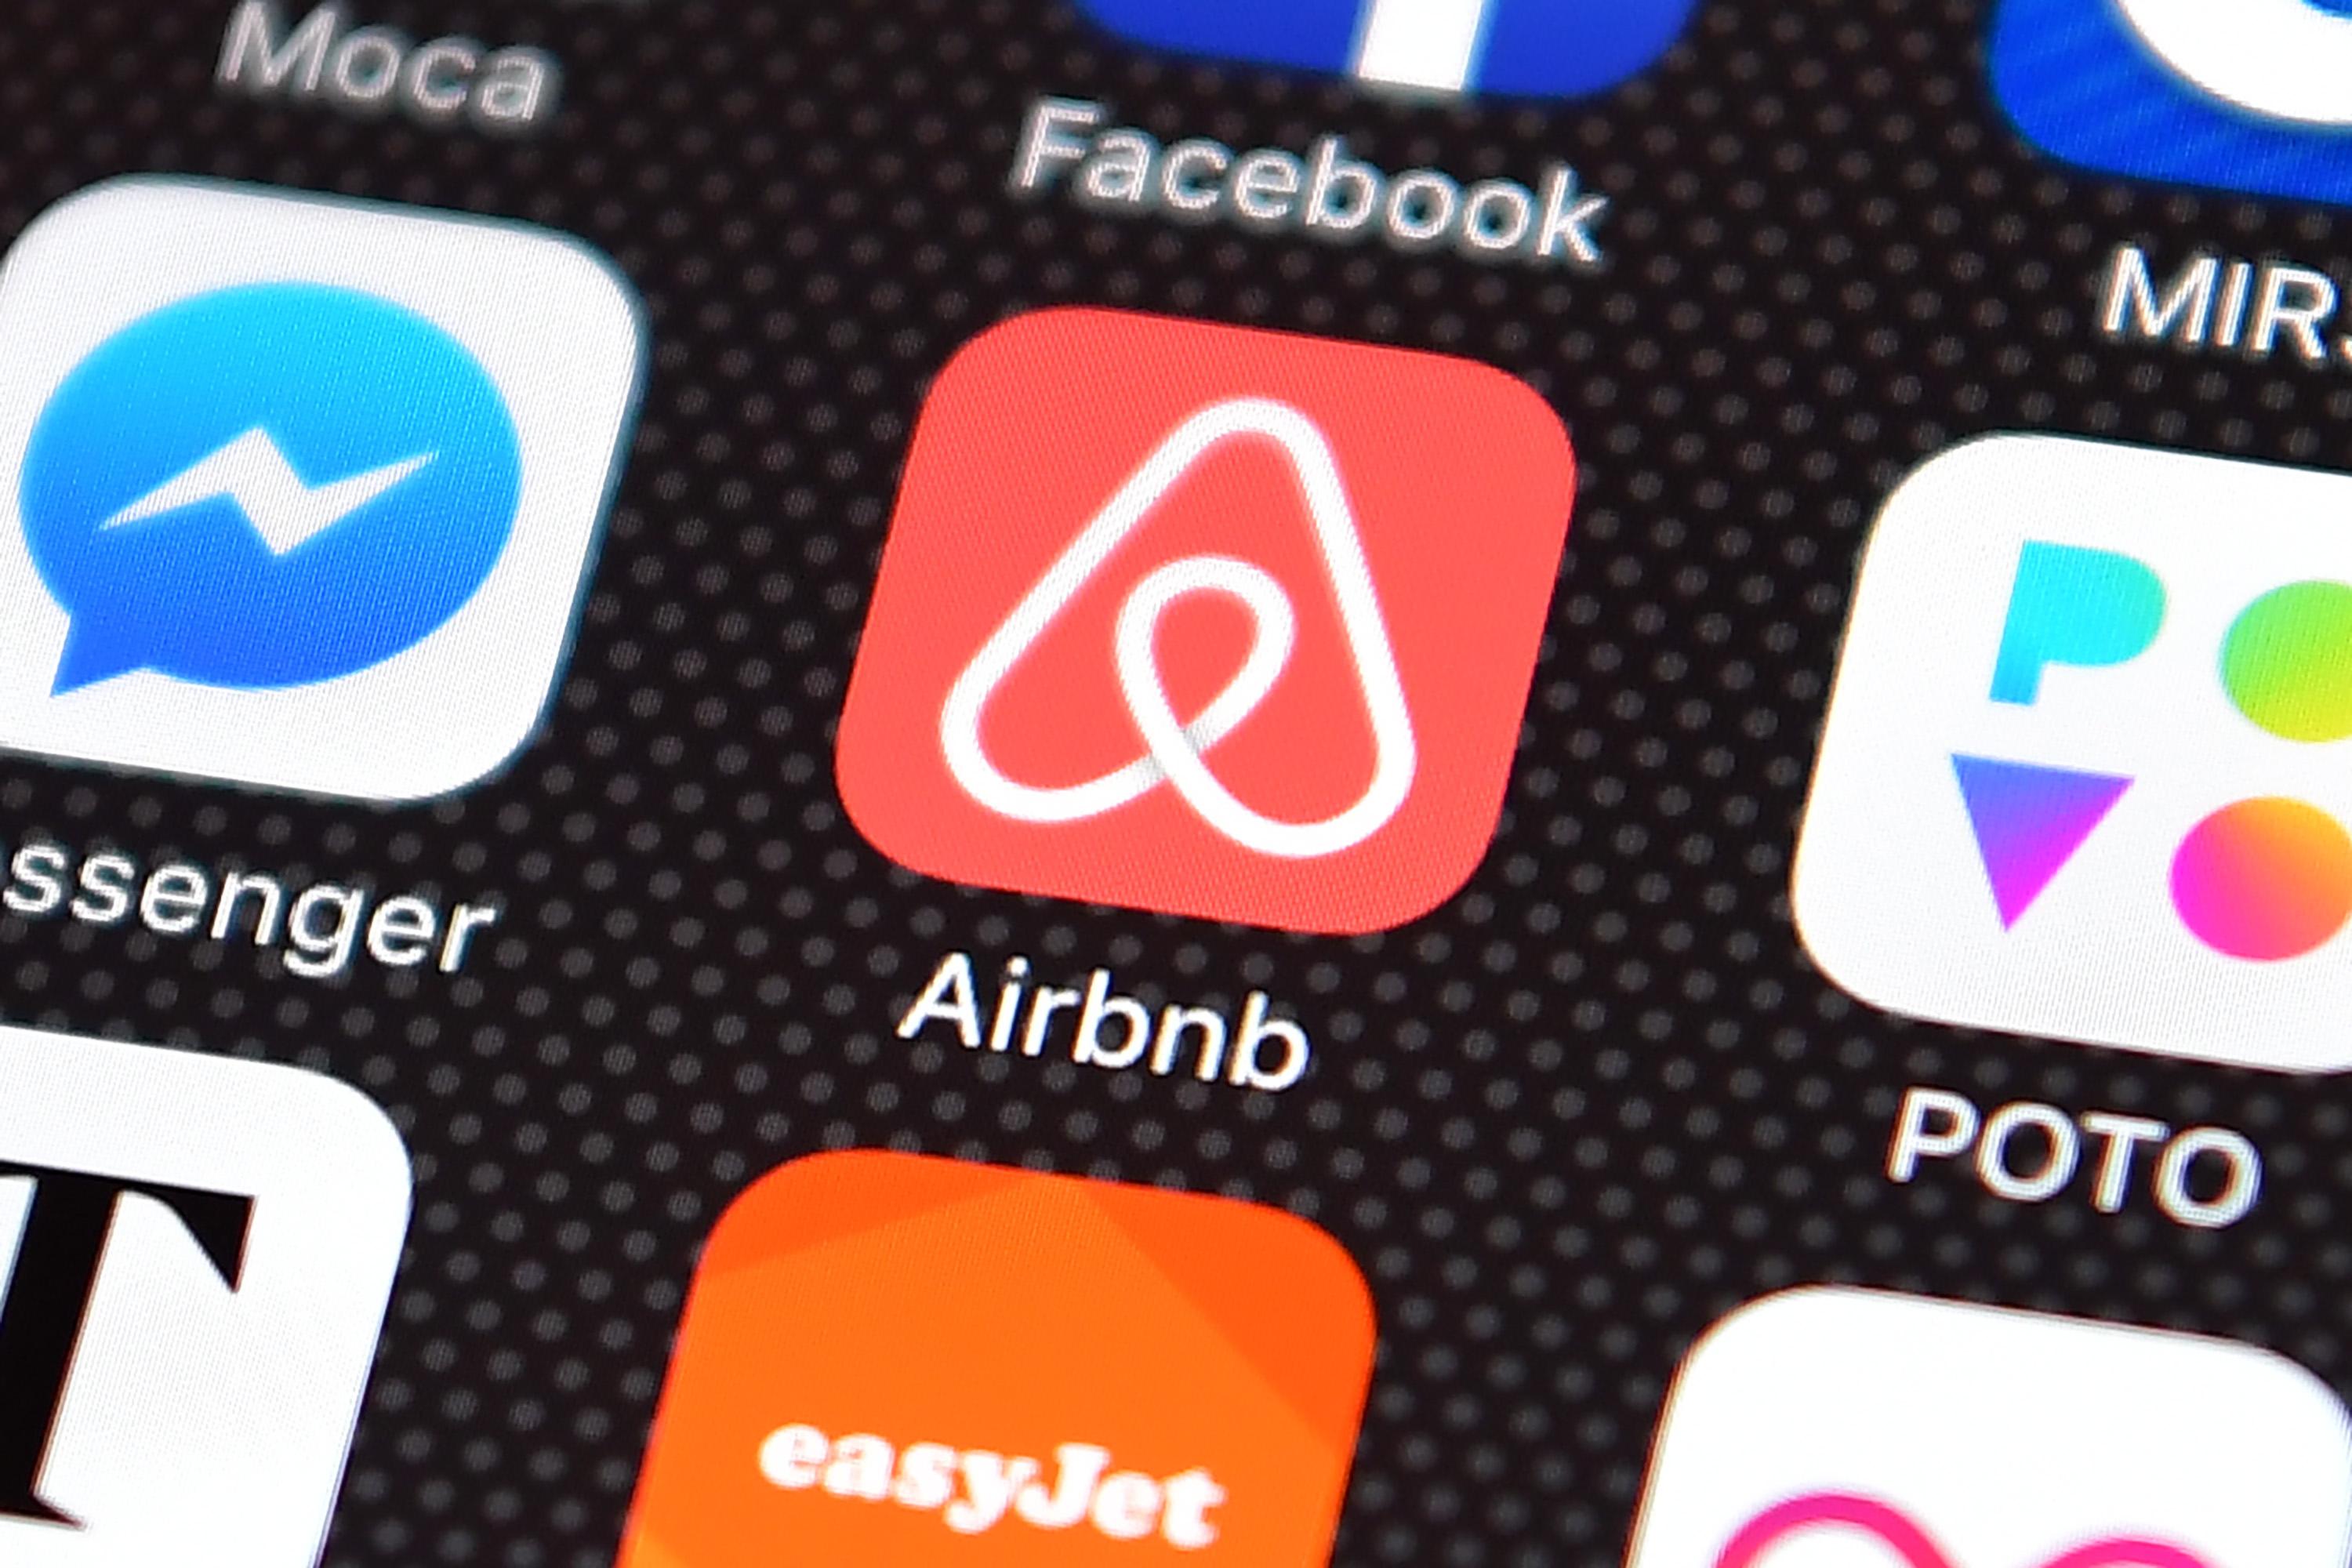 2 Indicted in Alleged $8.5 Million Airbnb Scam That Defrauded Thousands of Victims